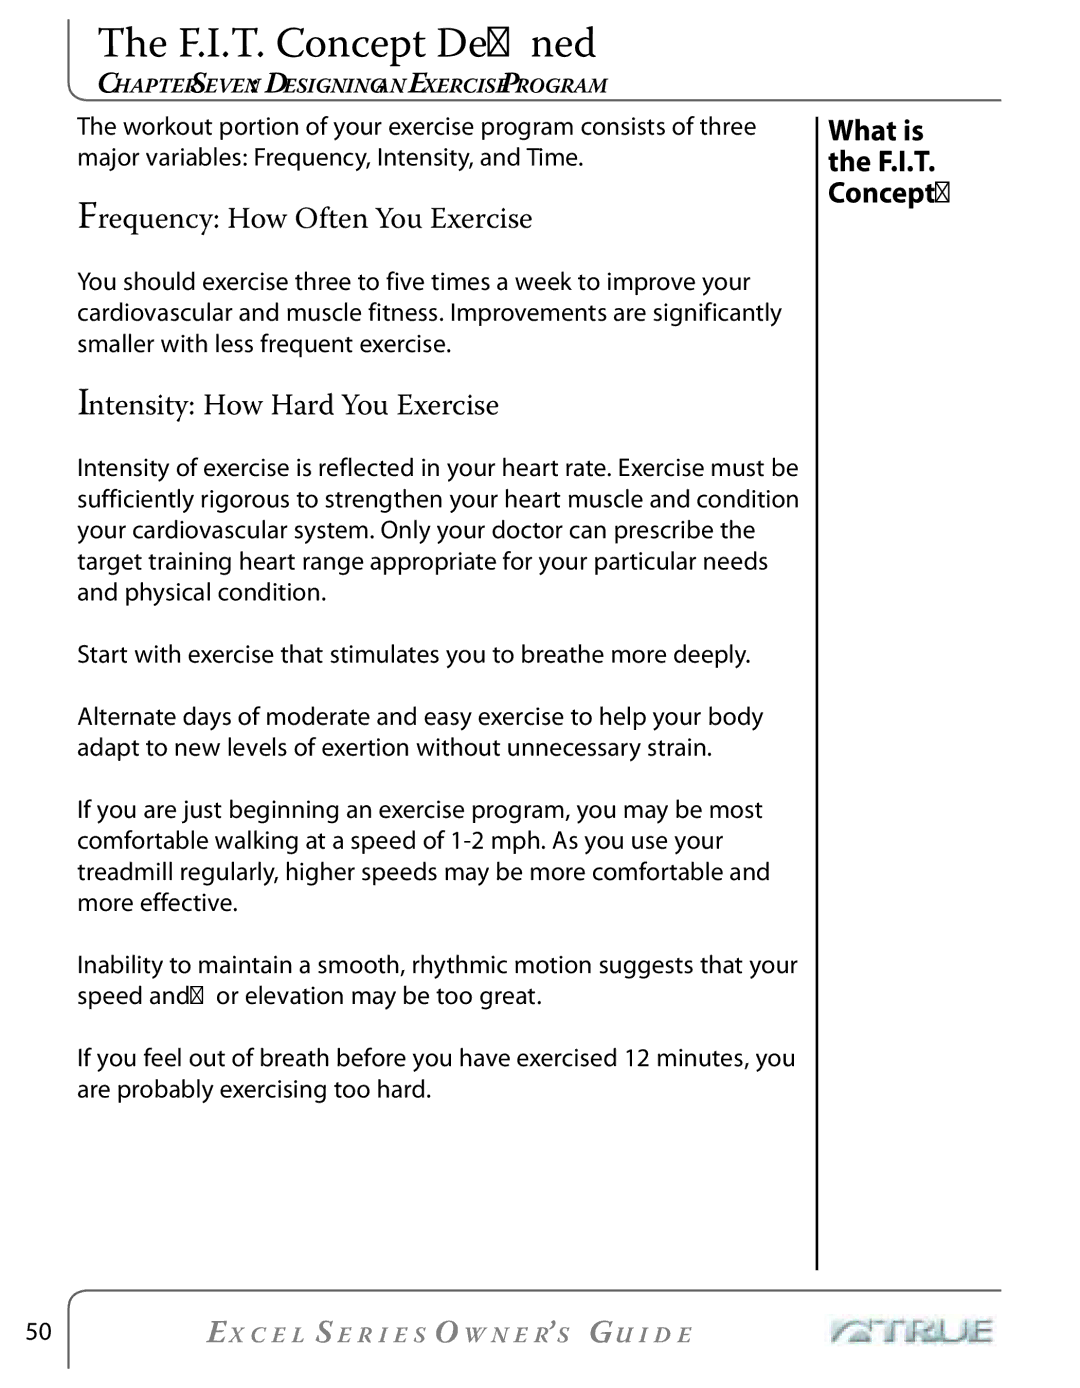 True Fitness Excel Series manual F.I.T. Concept Deﬁned, Frequency How Often You Exercise, Intensity How Hard You Exercise 